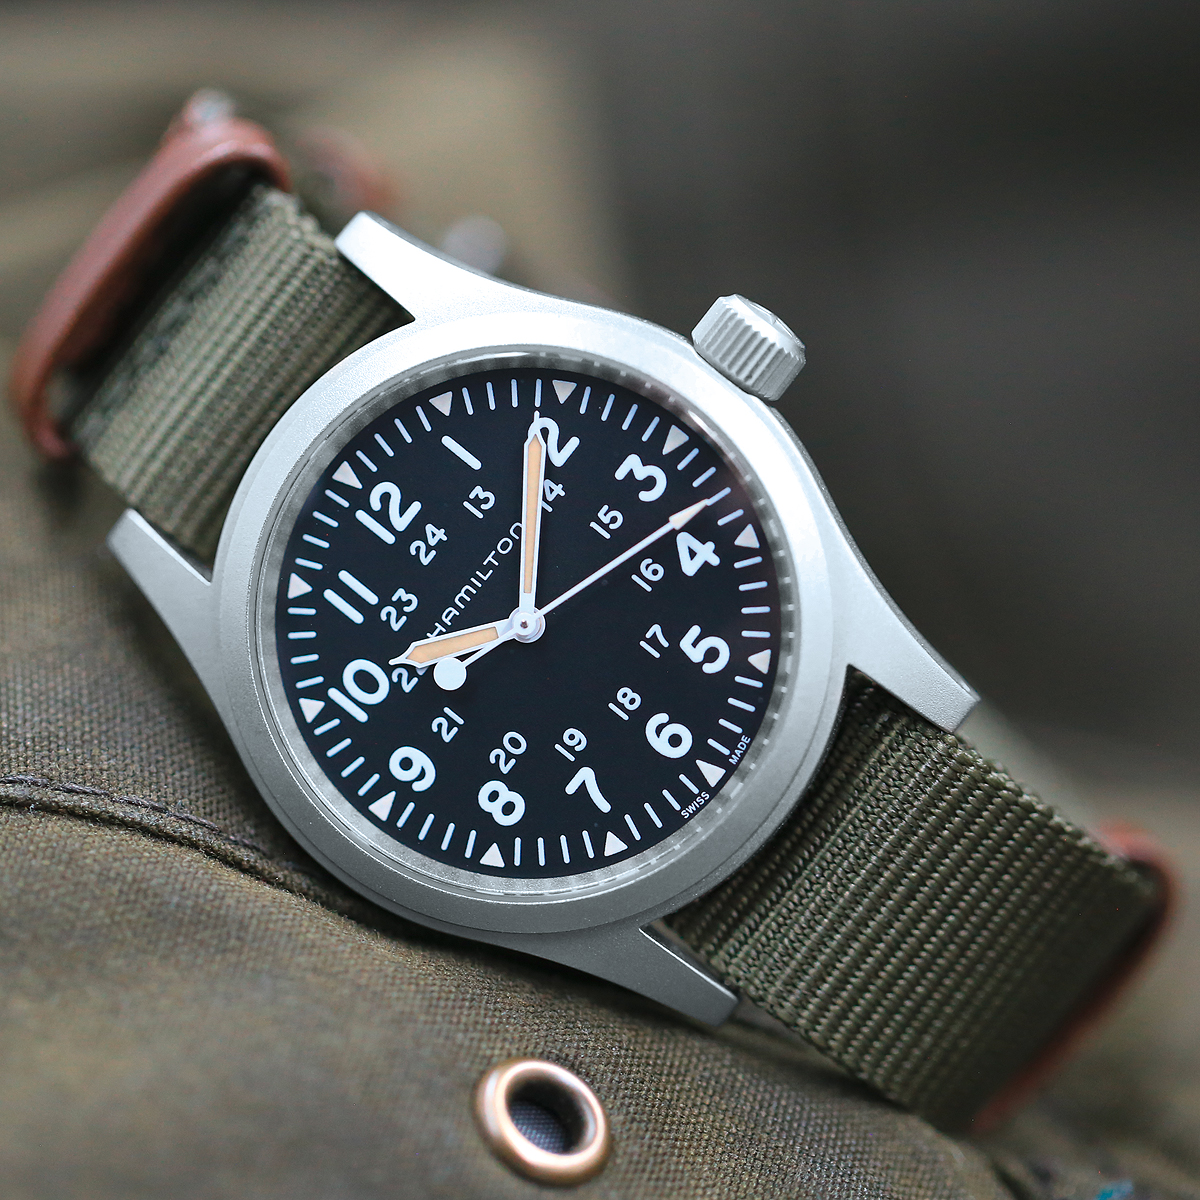 What are field watches?